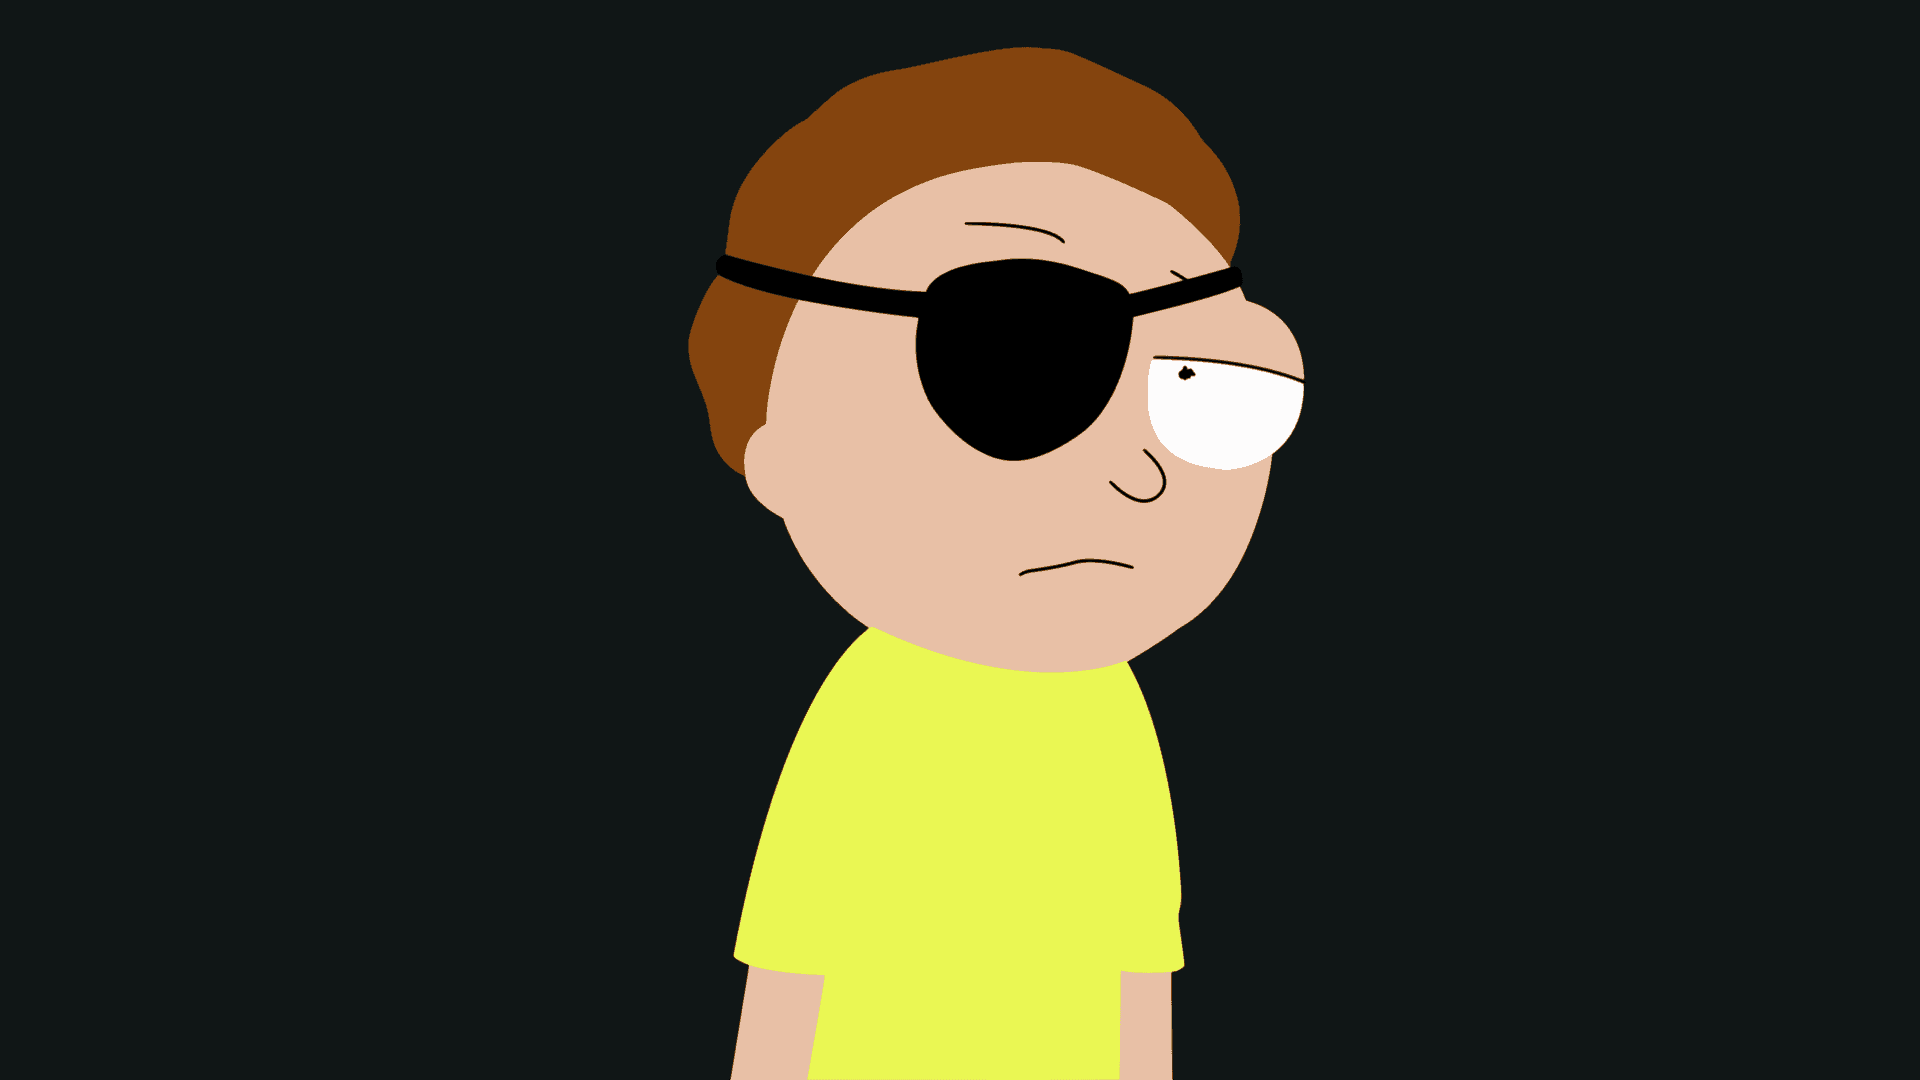 Cartoon Character Morty Smith From Rick And Morty Wallpaper